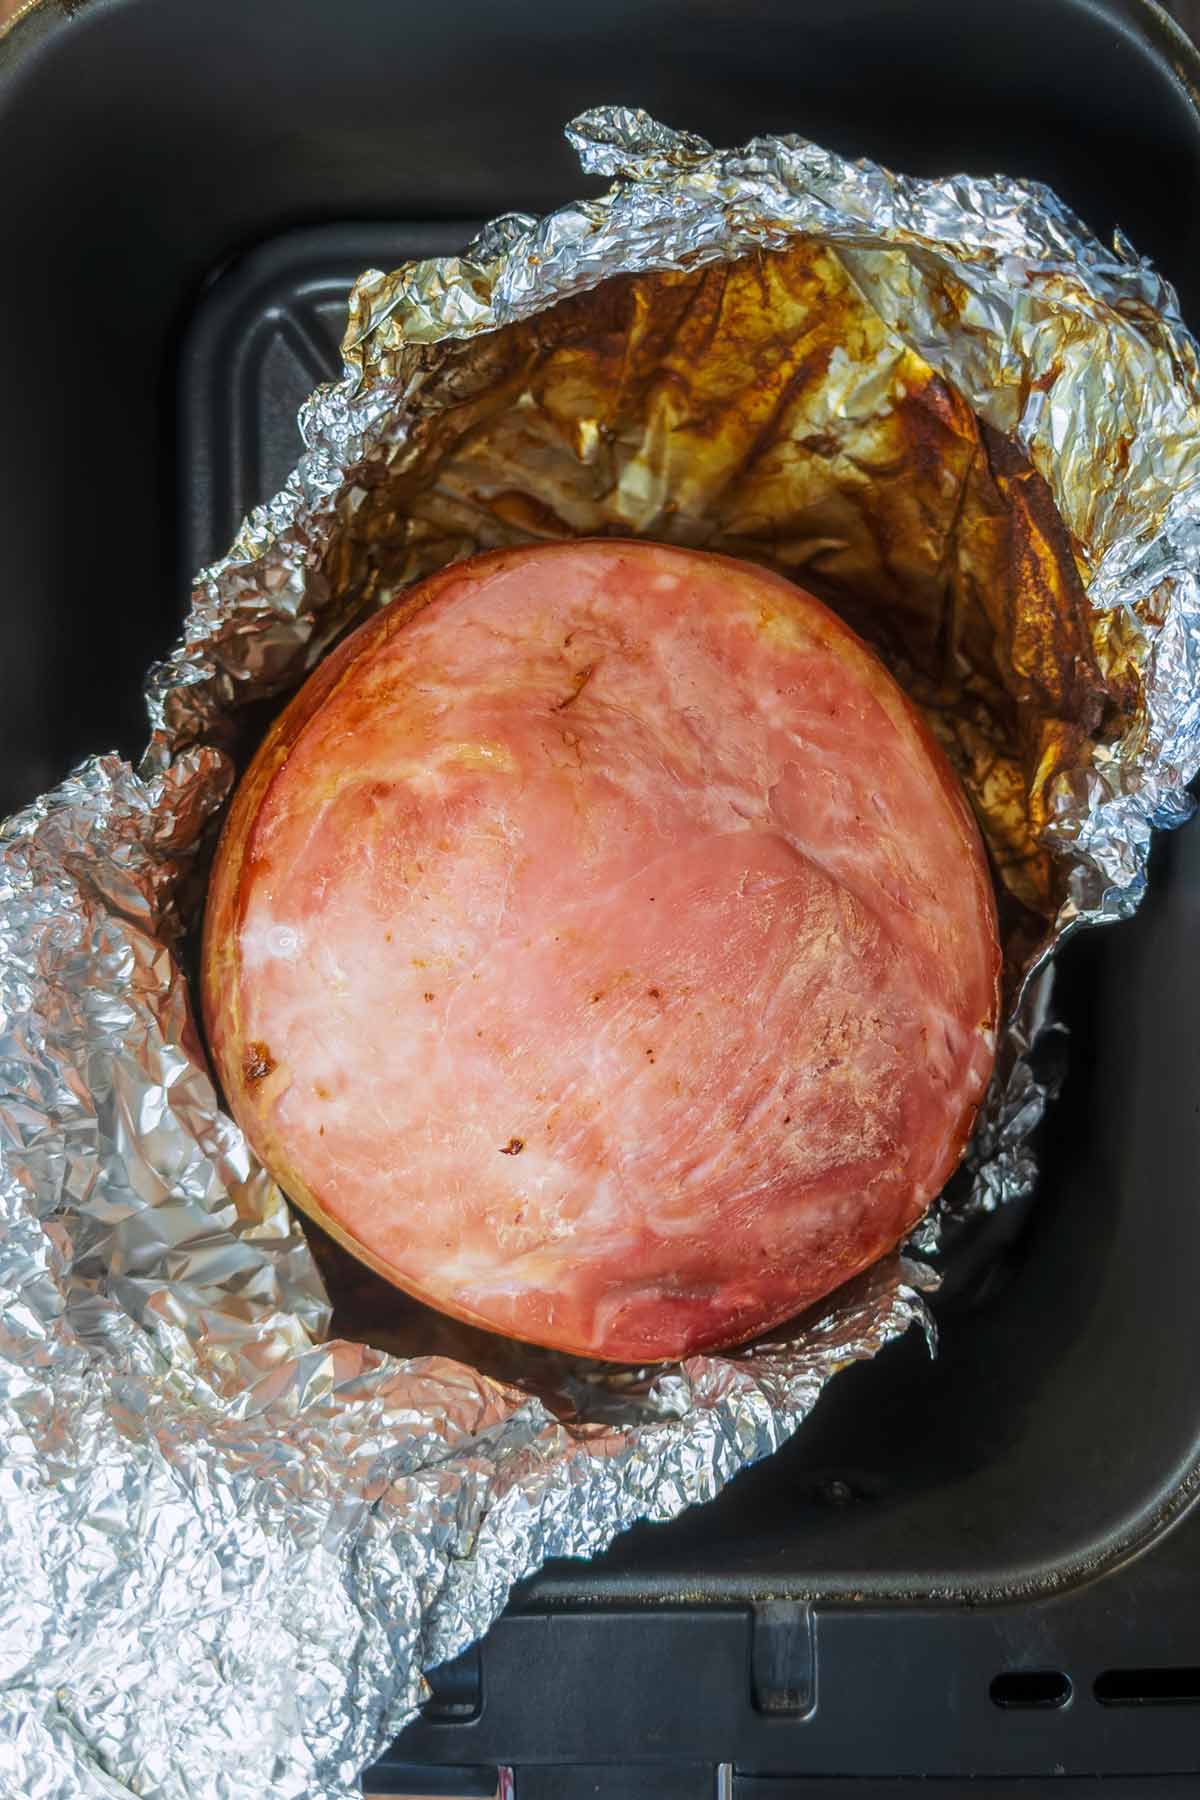 Cooked gammon joint on in open foil.